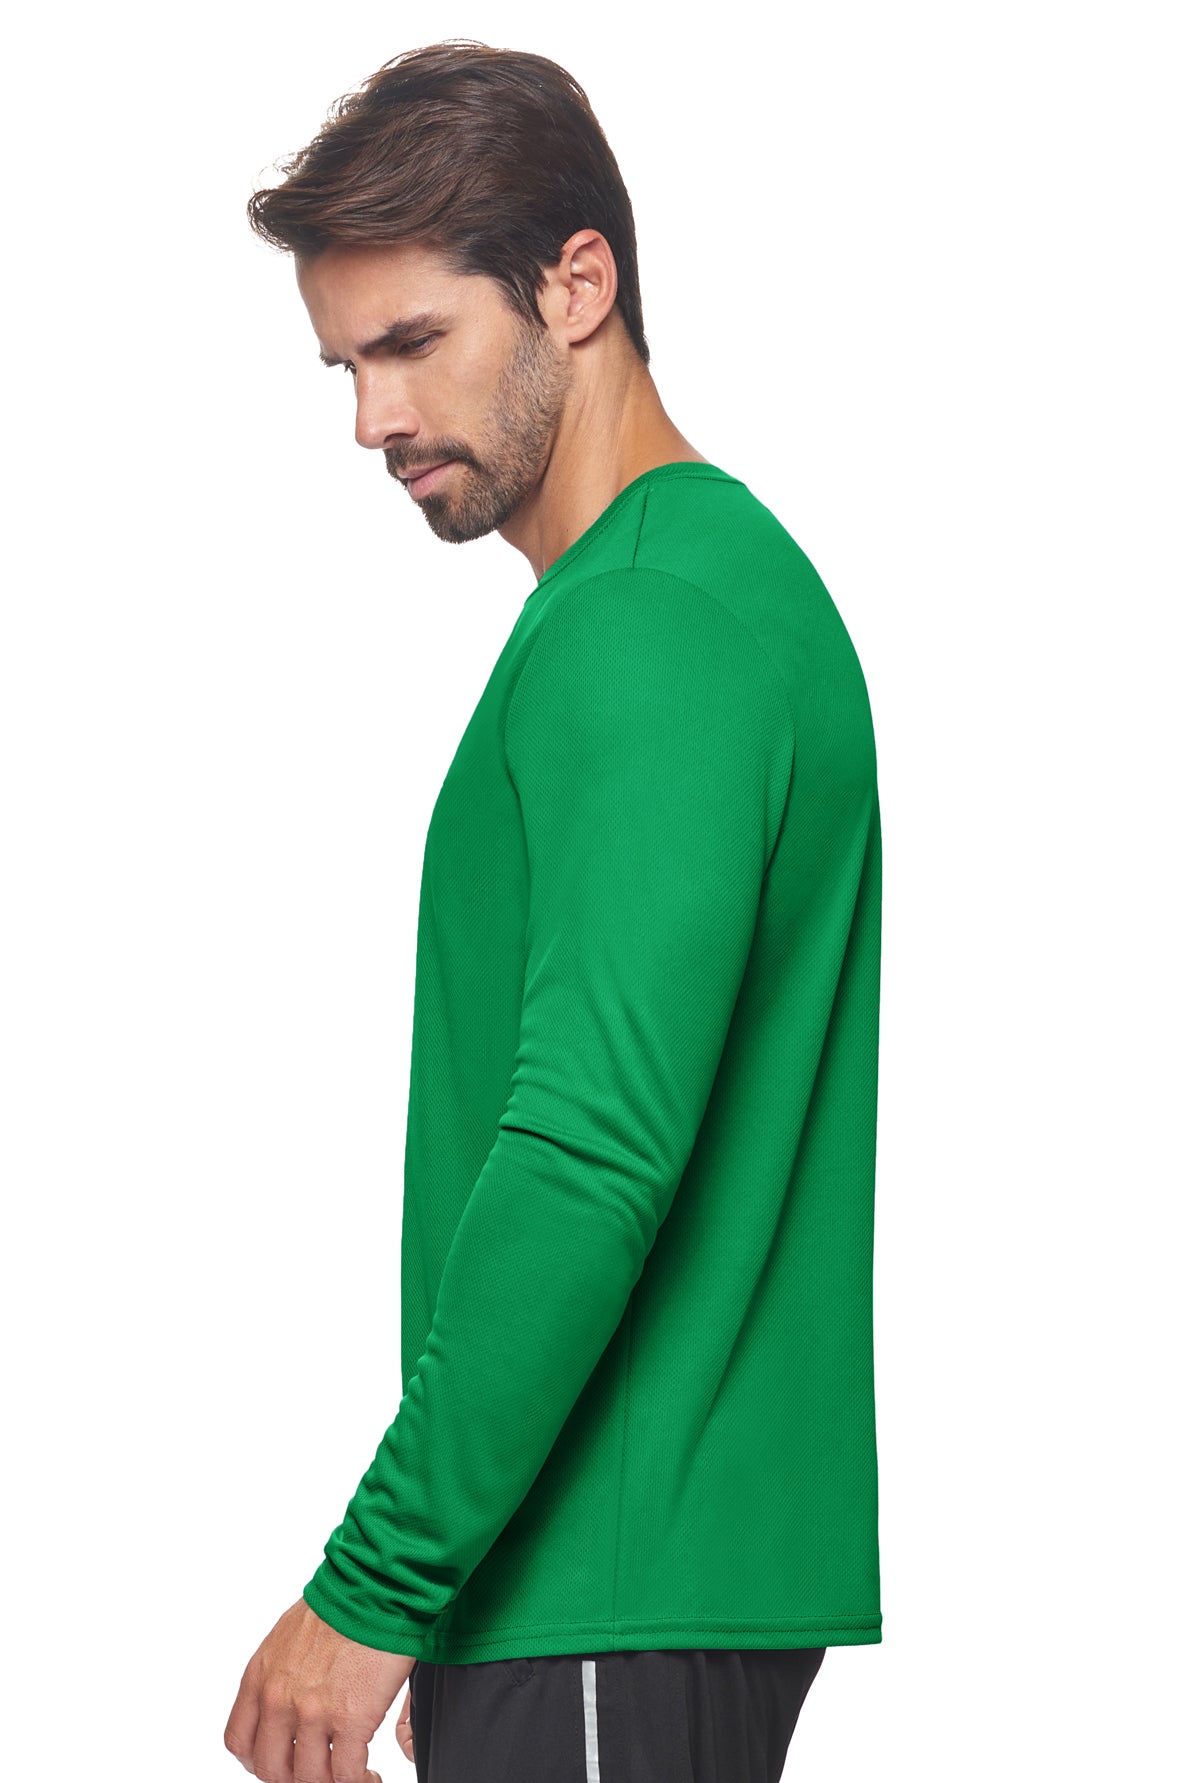 Expert Brand Wholesale Men's Oxymesh Performance Long Sleeve Tec Tee Made in USA AJ901D Kelly Green Image 2#kelly-green